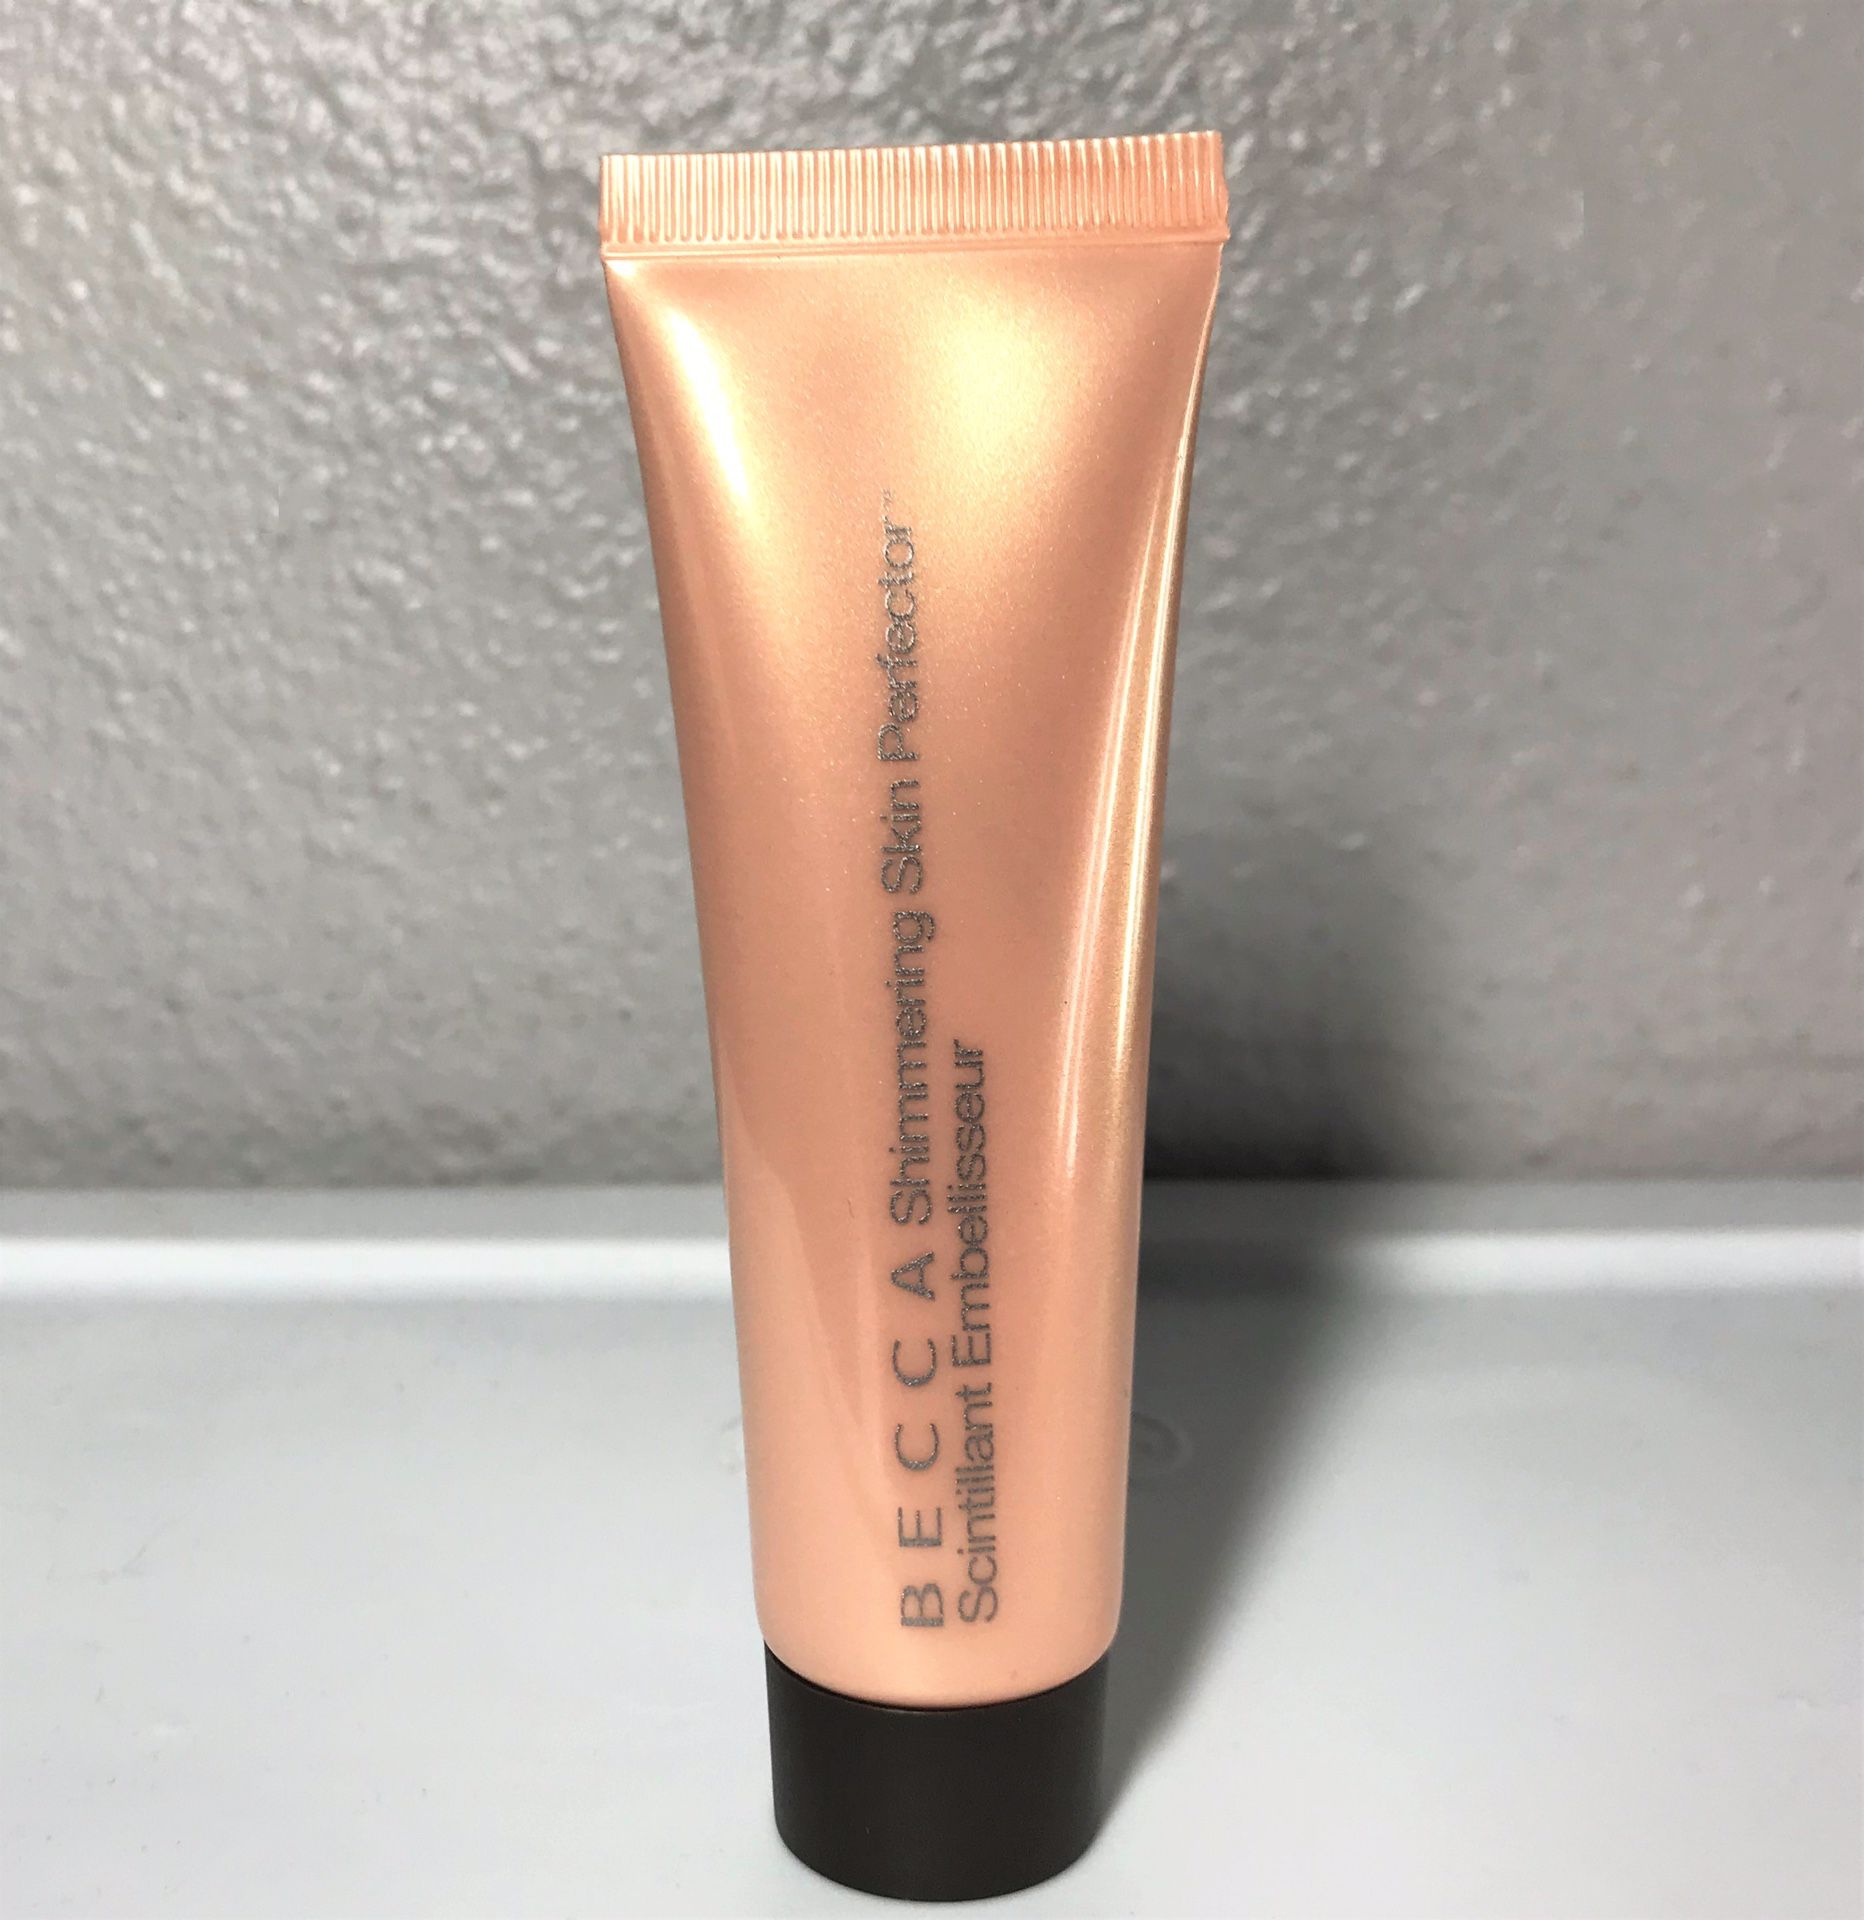 New/Sealed Becca Shimmering Skin Perfector Liquid Highlighter In Opal - .68 oz